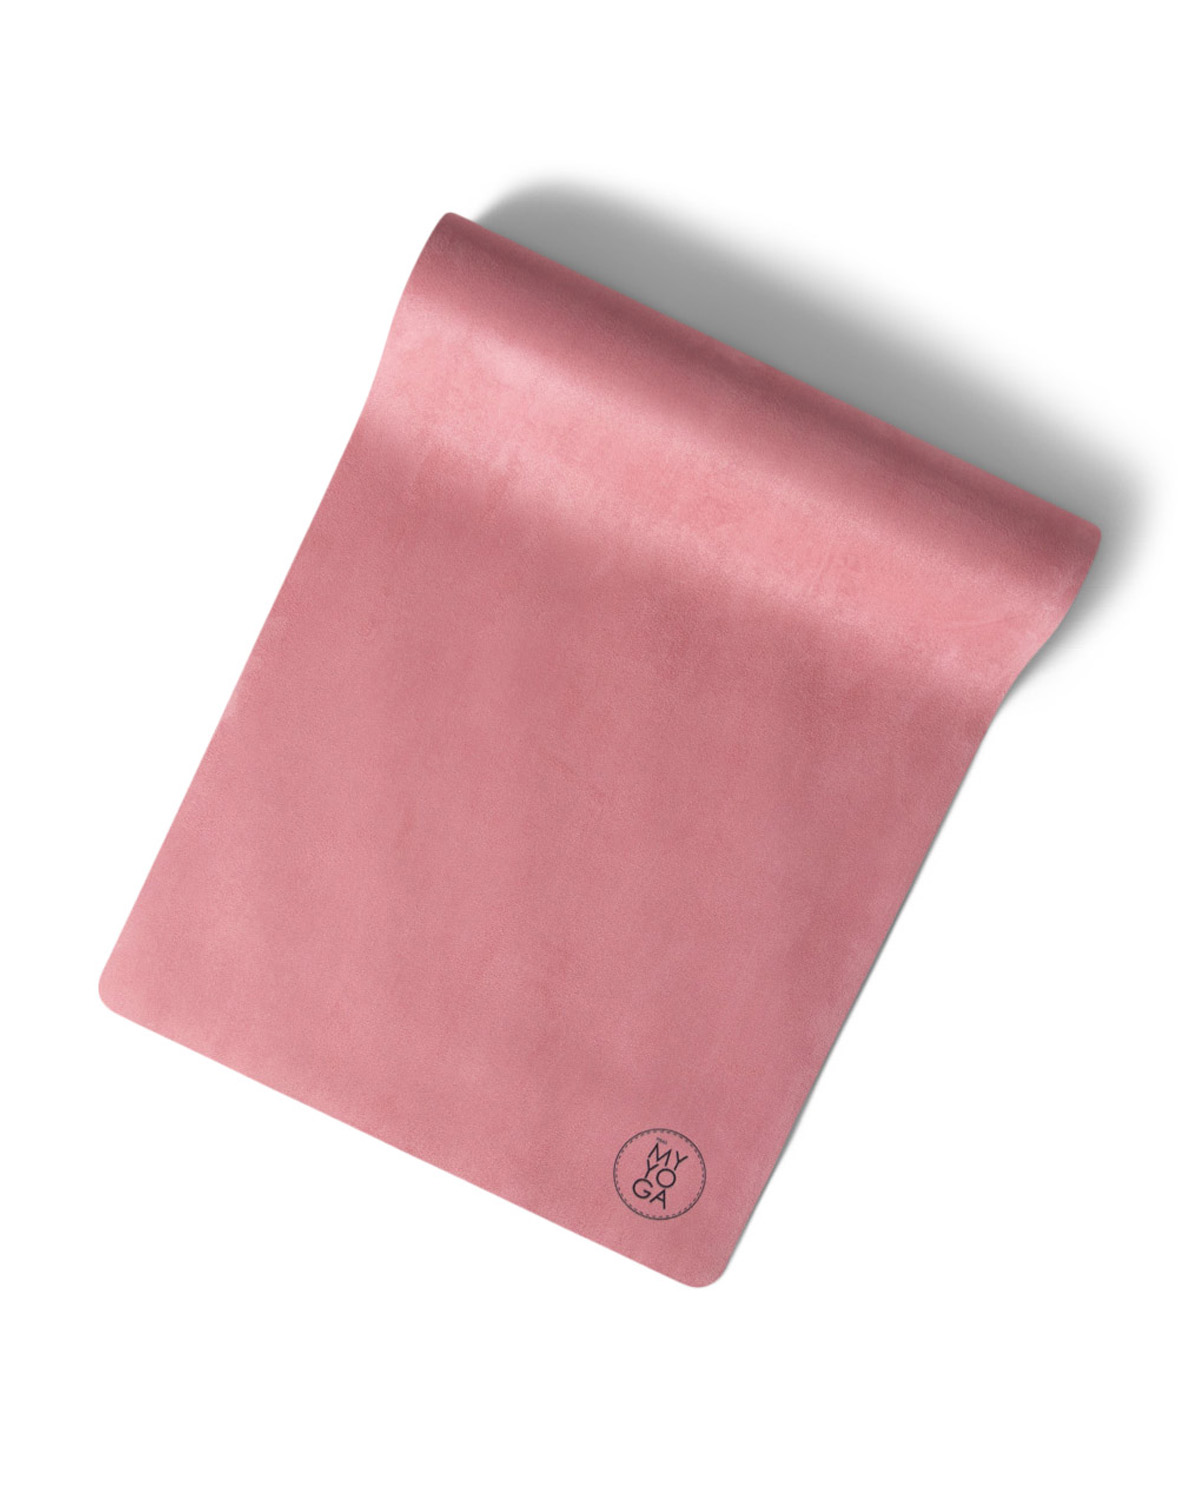 Entry Level Yoga Mat Dusty Pink